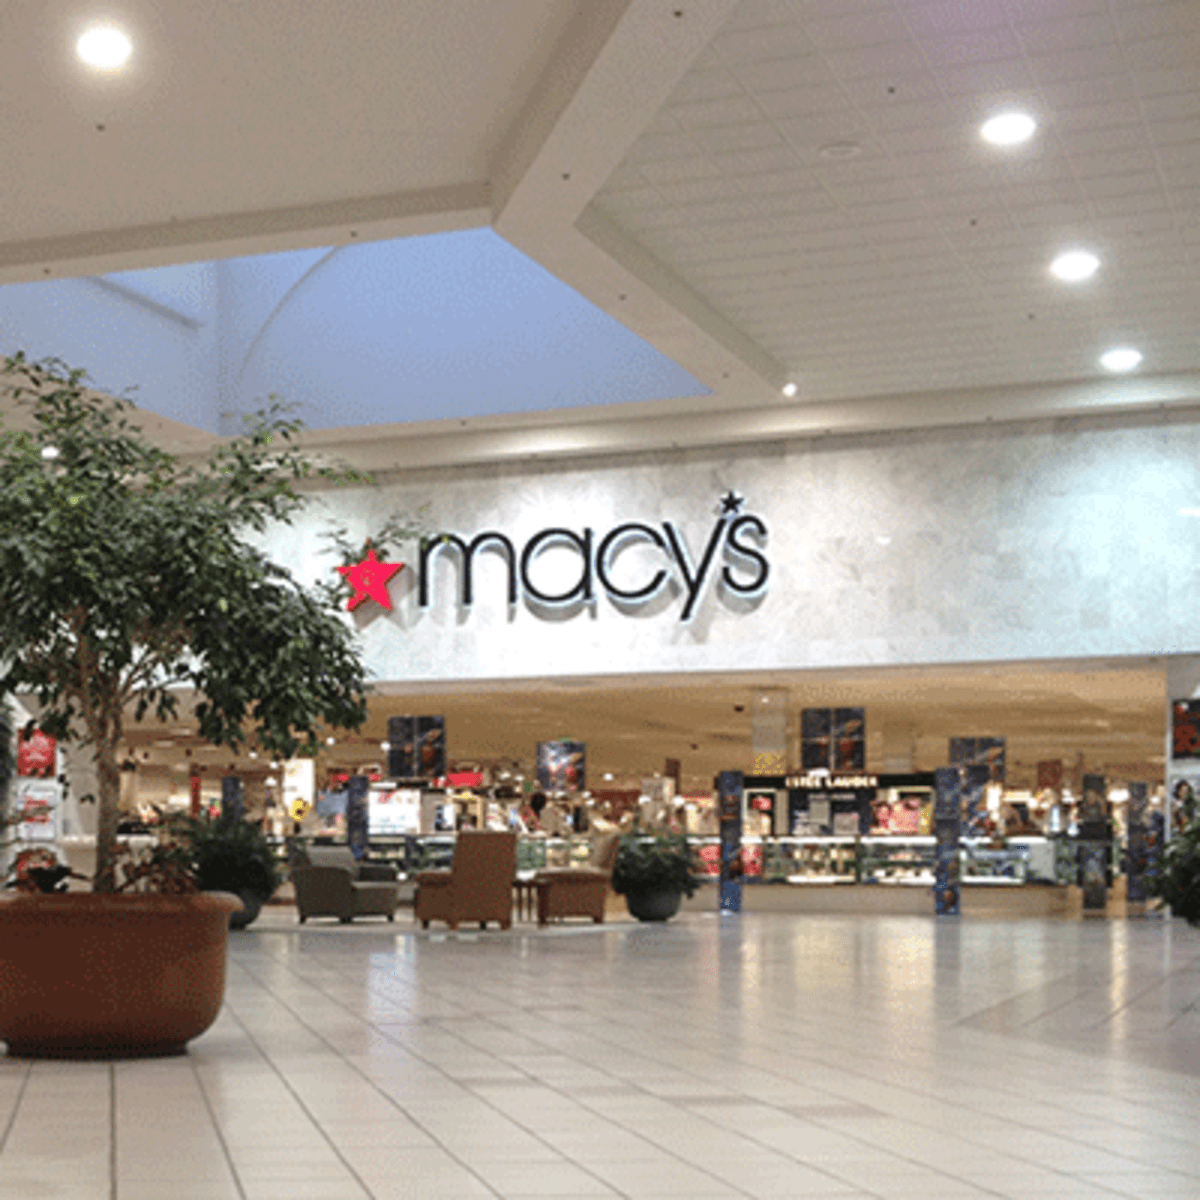 Multi-billion American retail giant Macys forces tiny Scots hair salon to  change their name in 'pathetic' trademark dispute